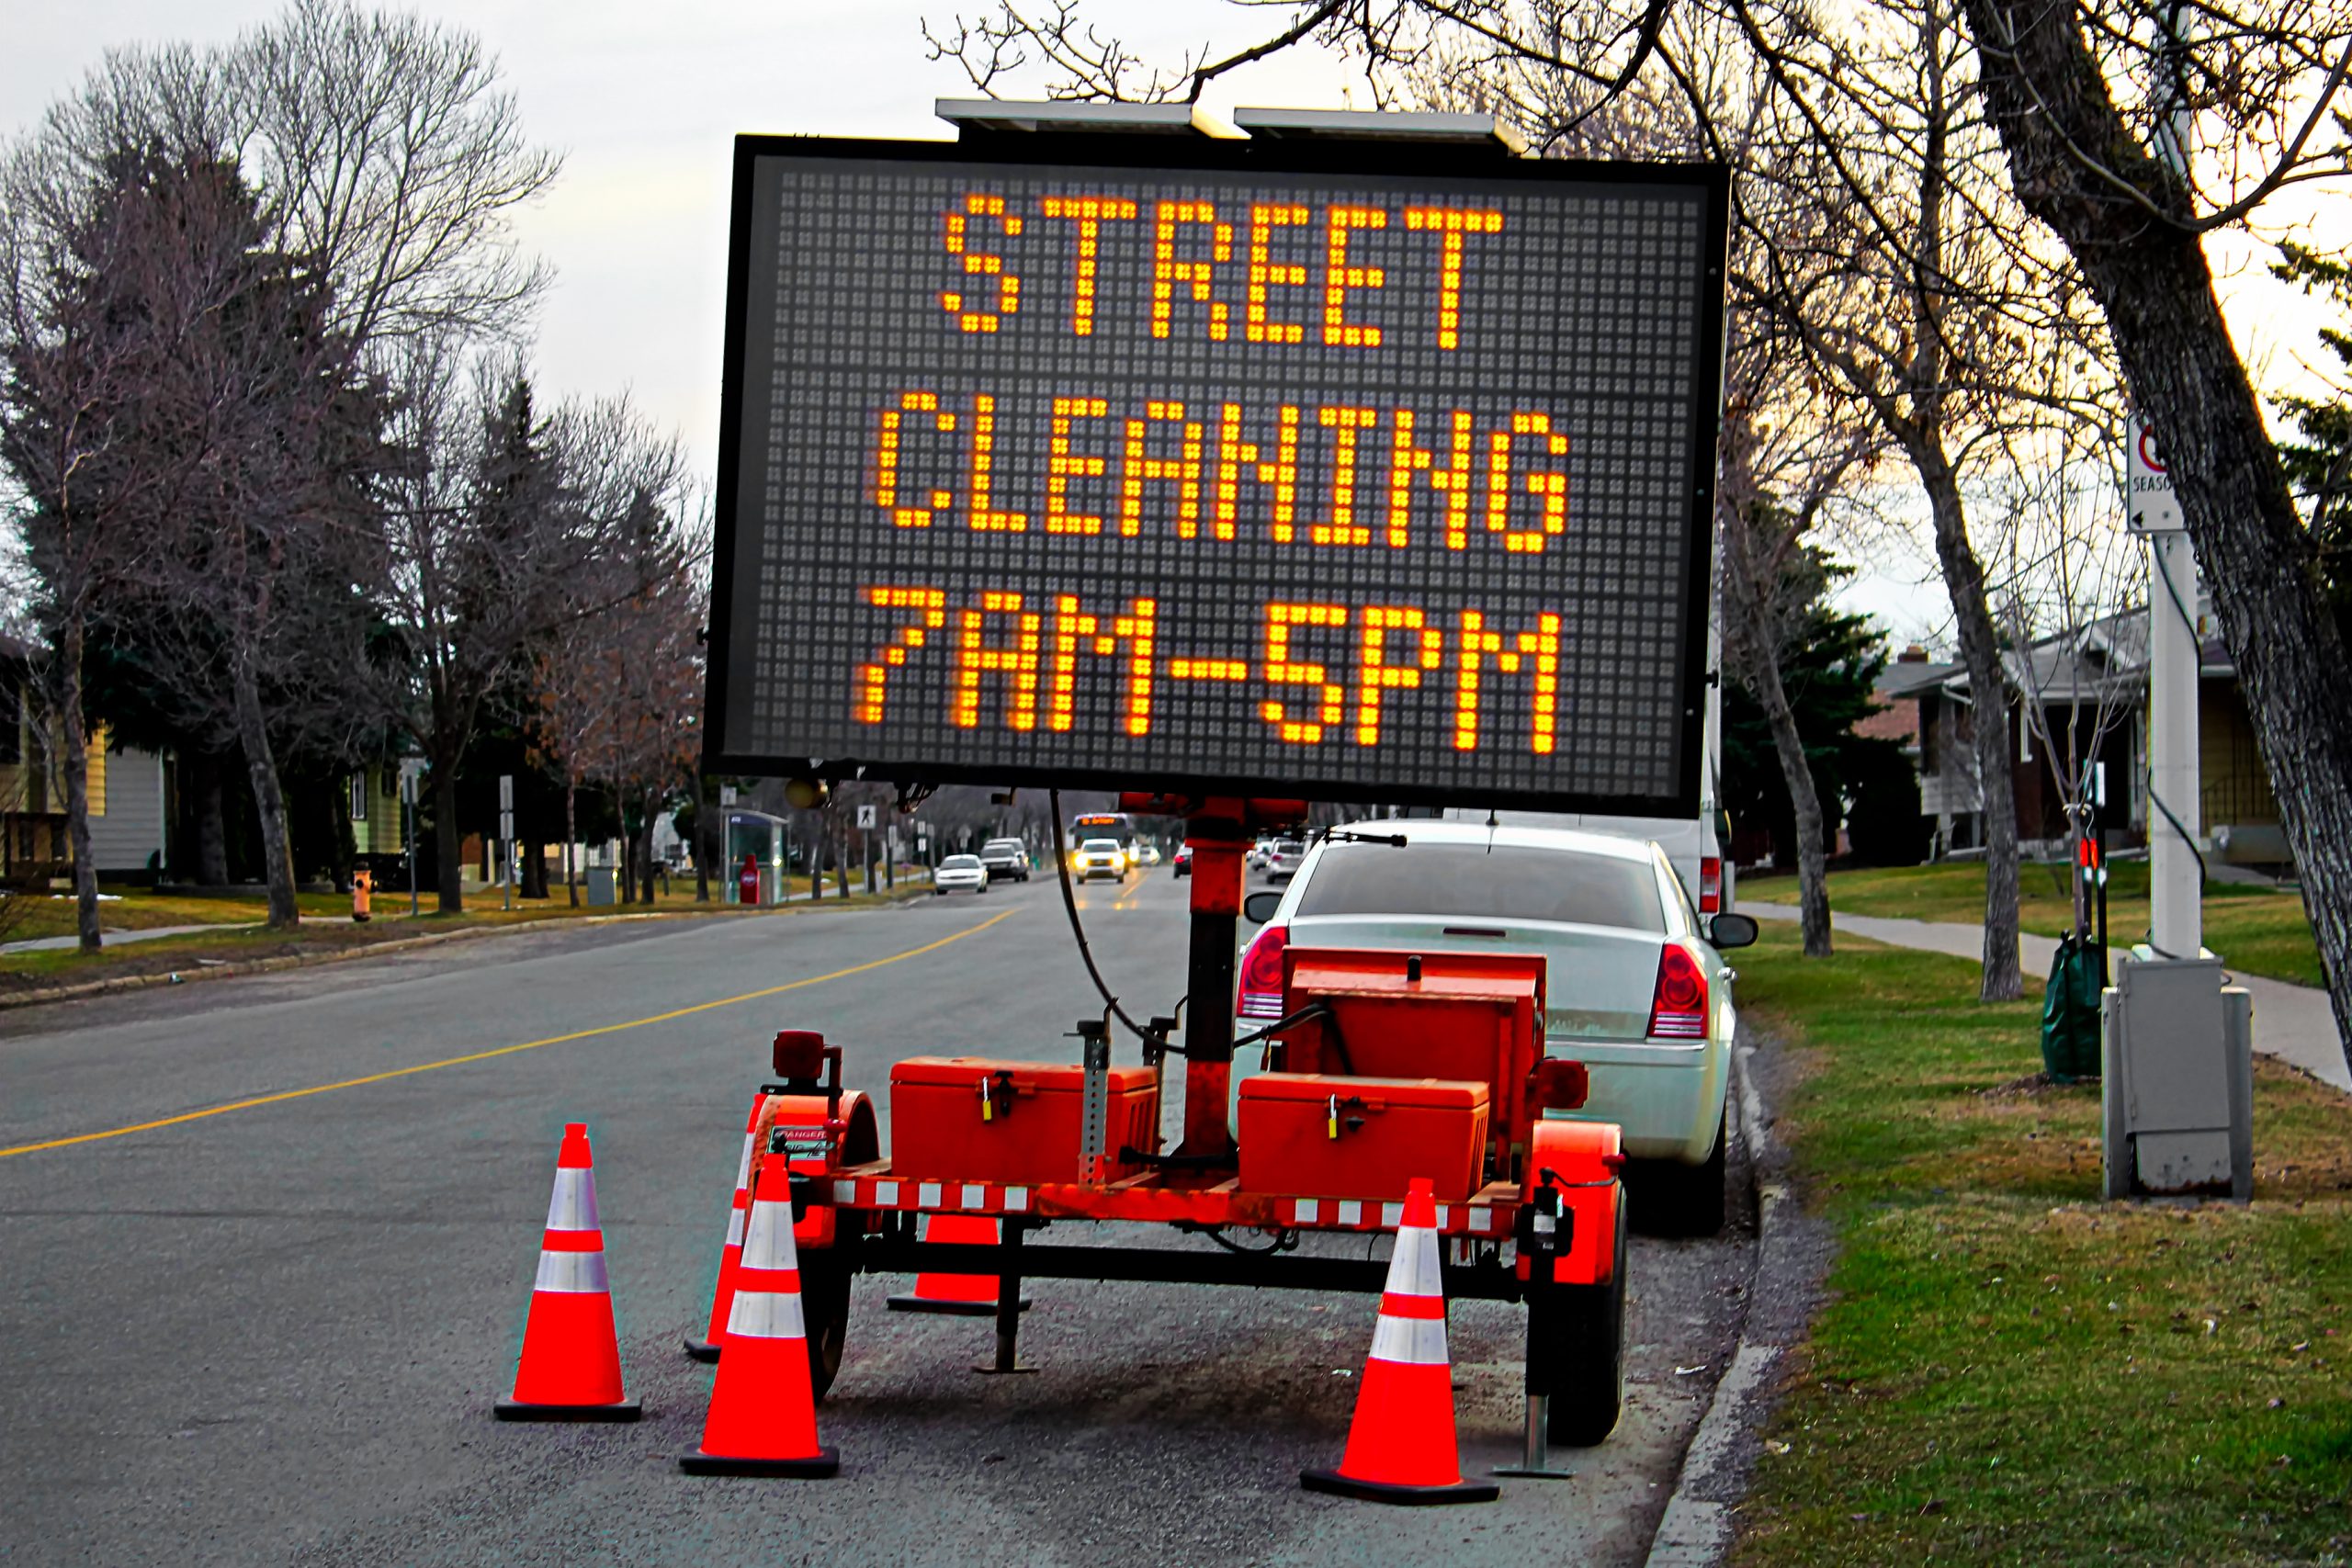 Custom Electronic Signage - Street Cleaning 7 AM-5PM